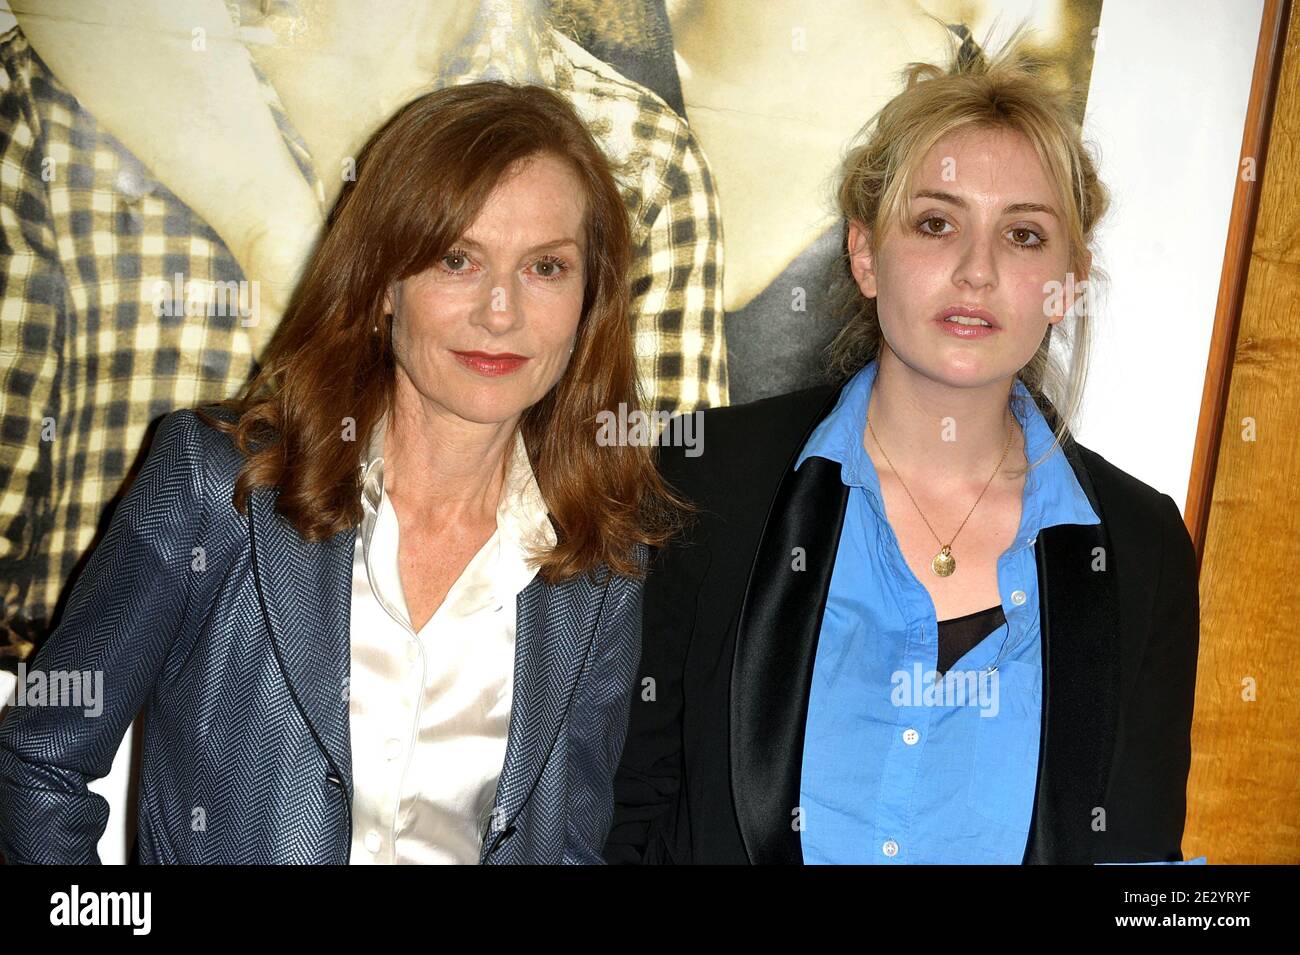 Isabelle Huppert and her daughter Lolita Chammah attending the premiere of  'Copacabana' directed by Marc Fitoussi